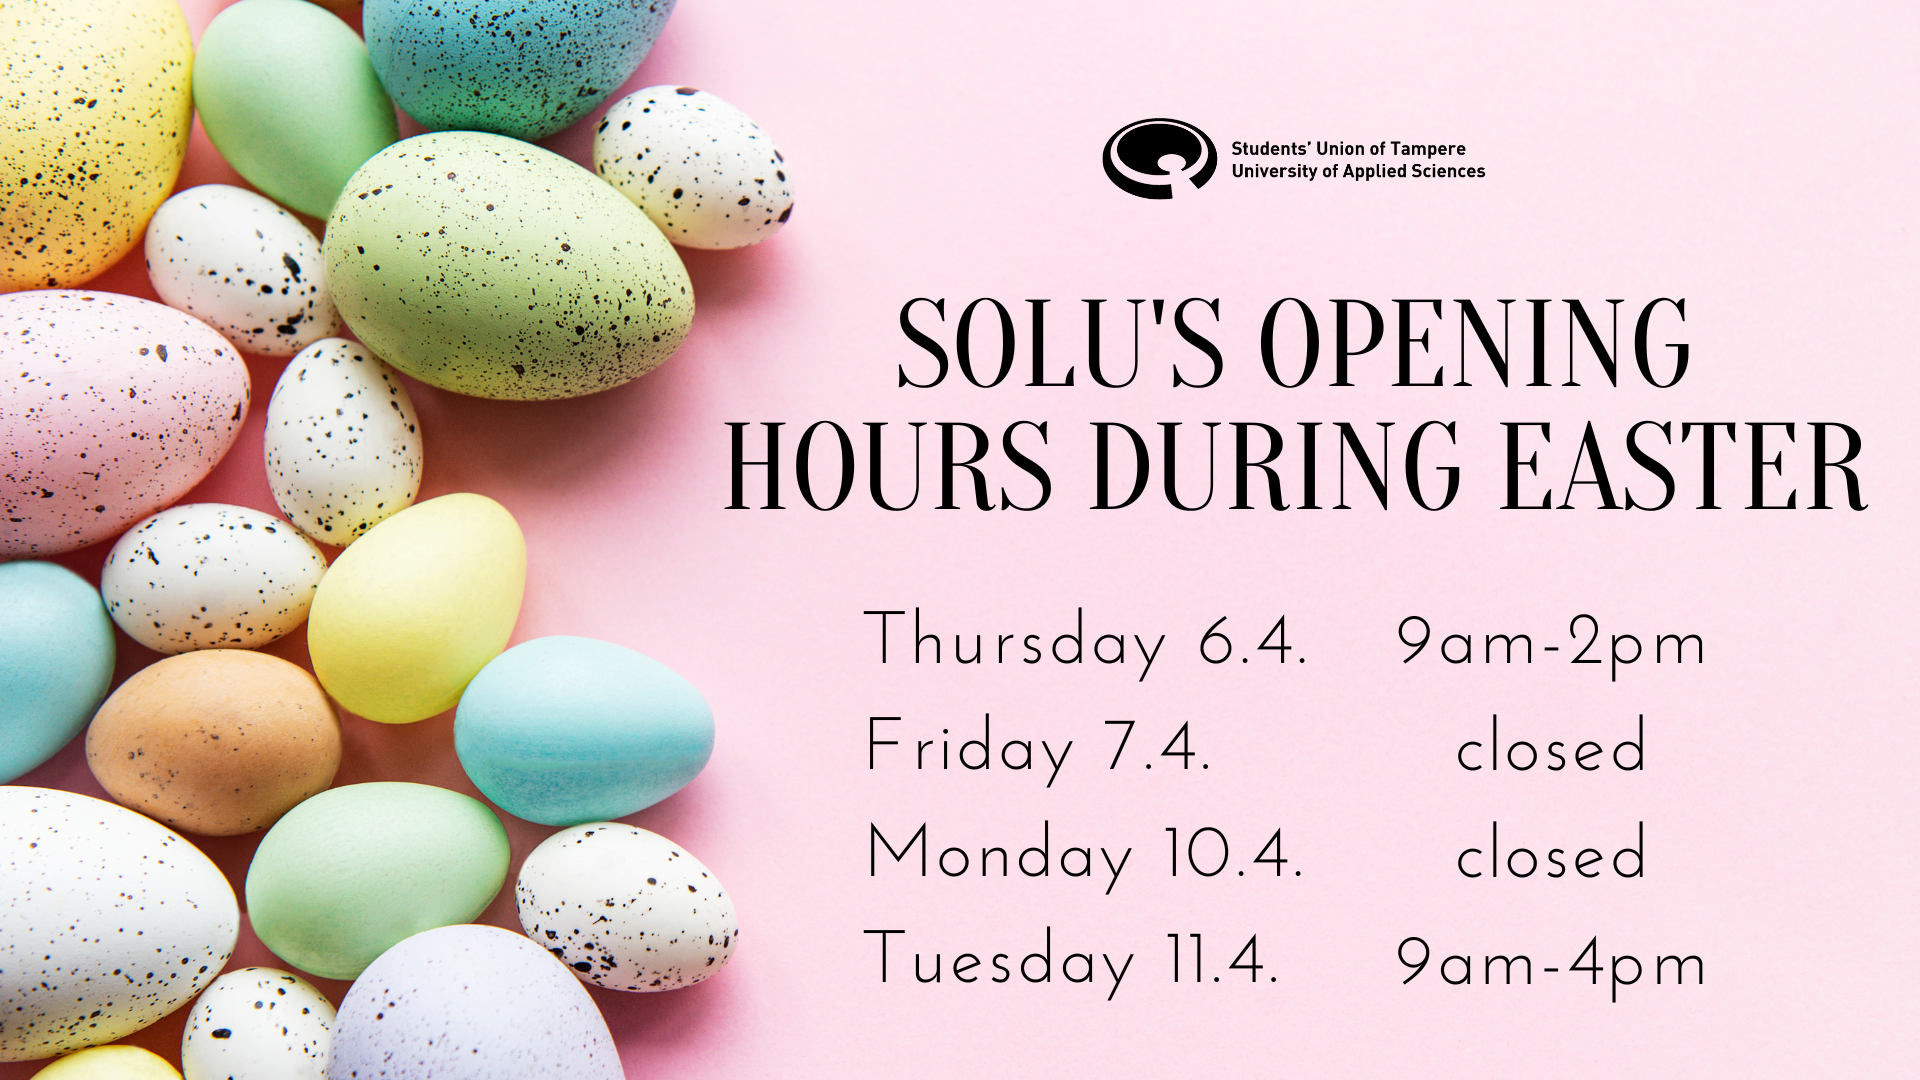 Solu’s opening hours during Easter